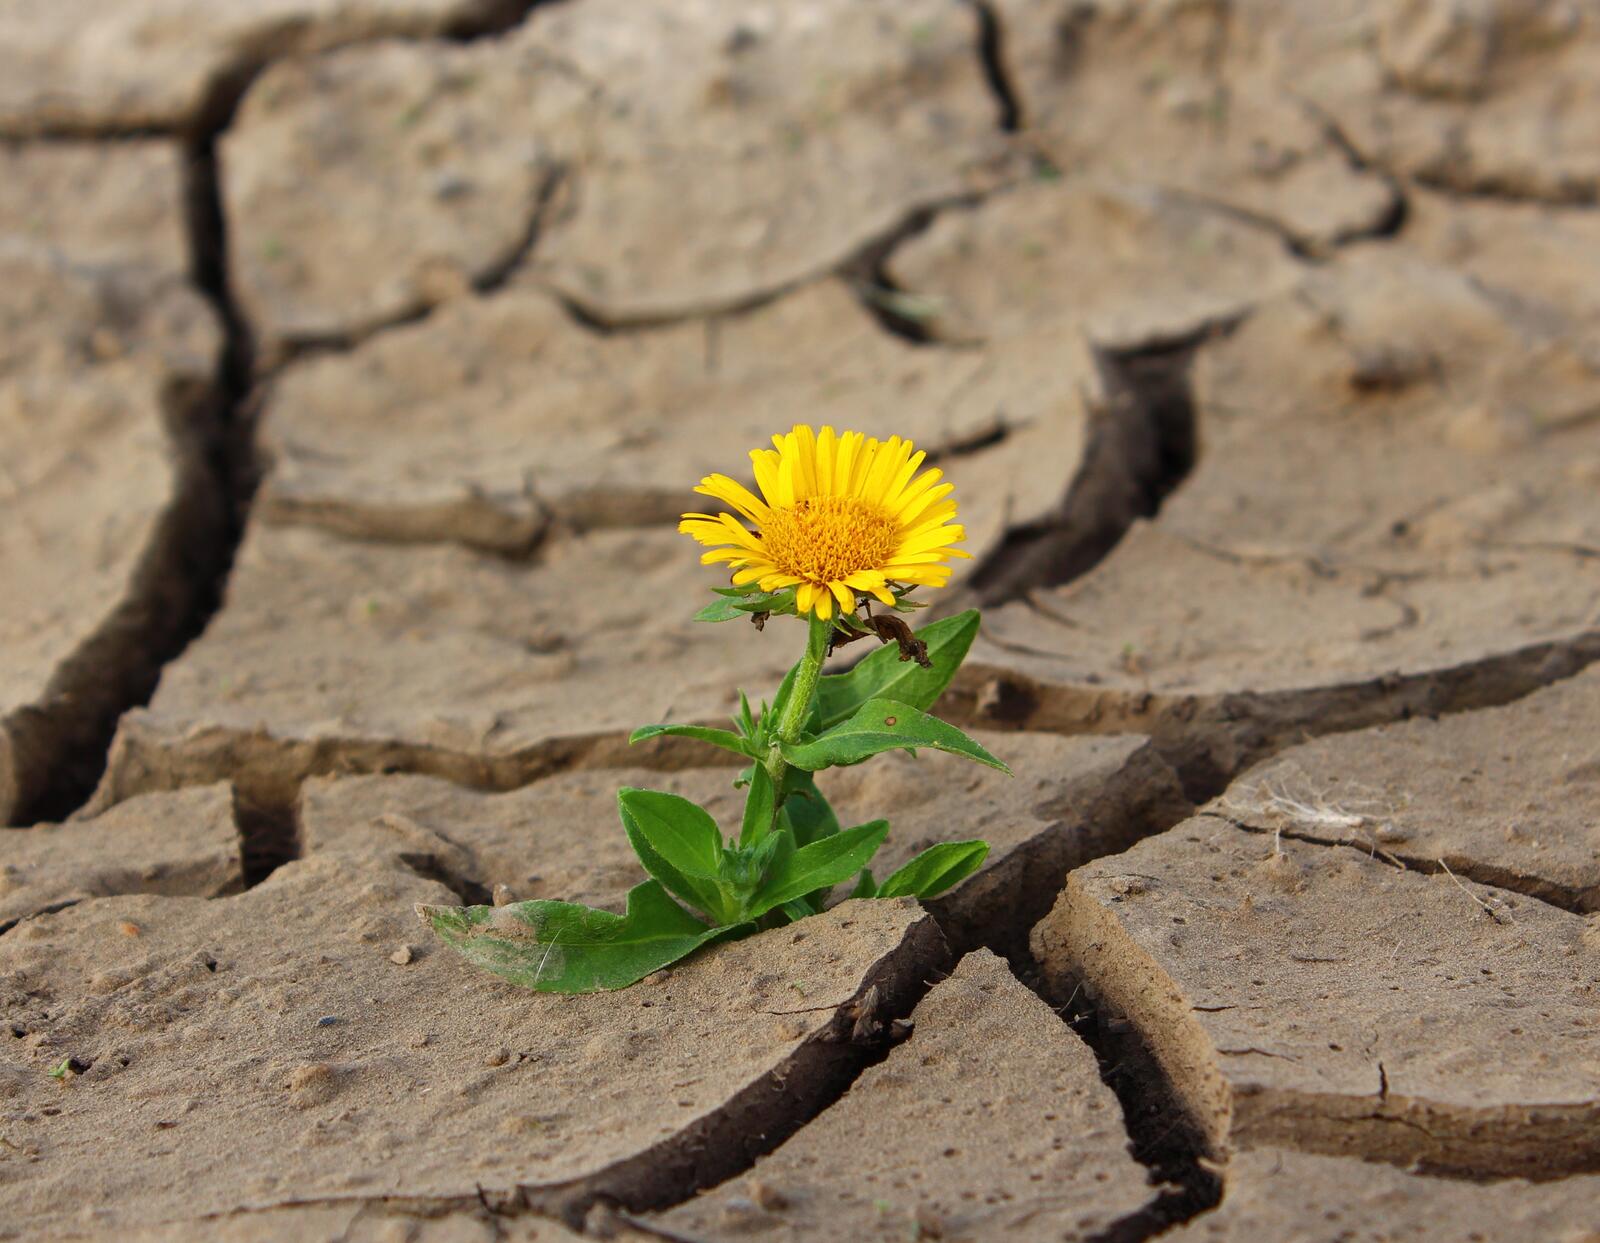 Free photo A lonely dandelion blooming in the dried, cracked soil